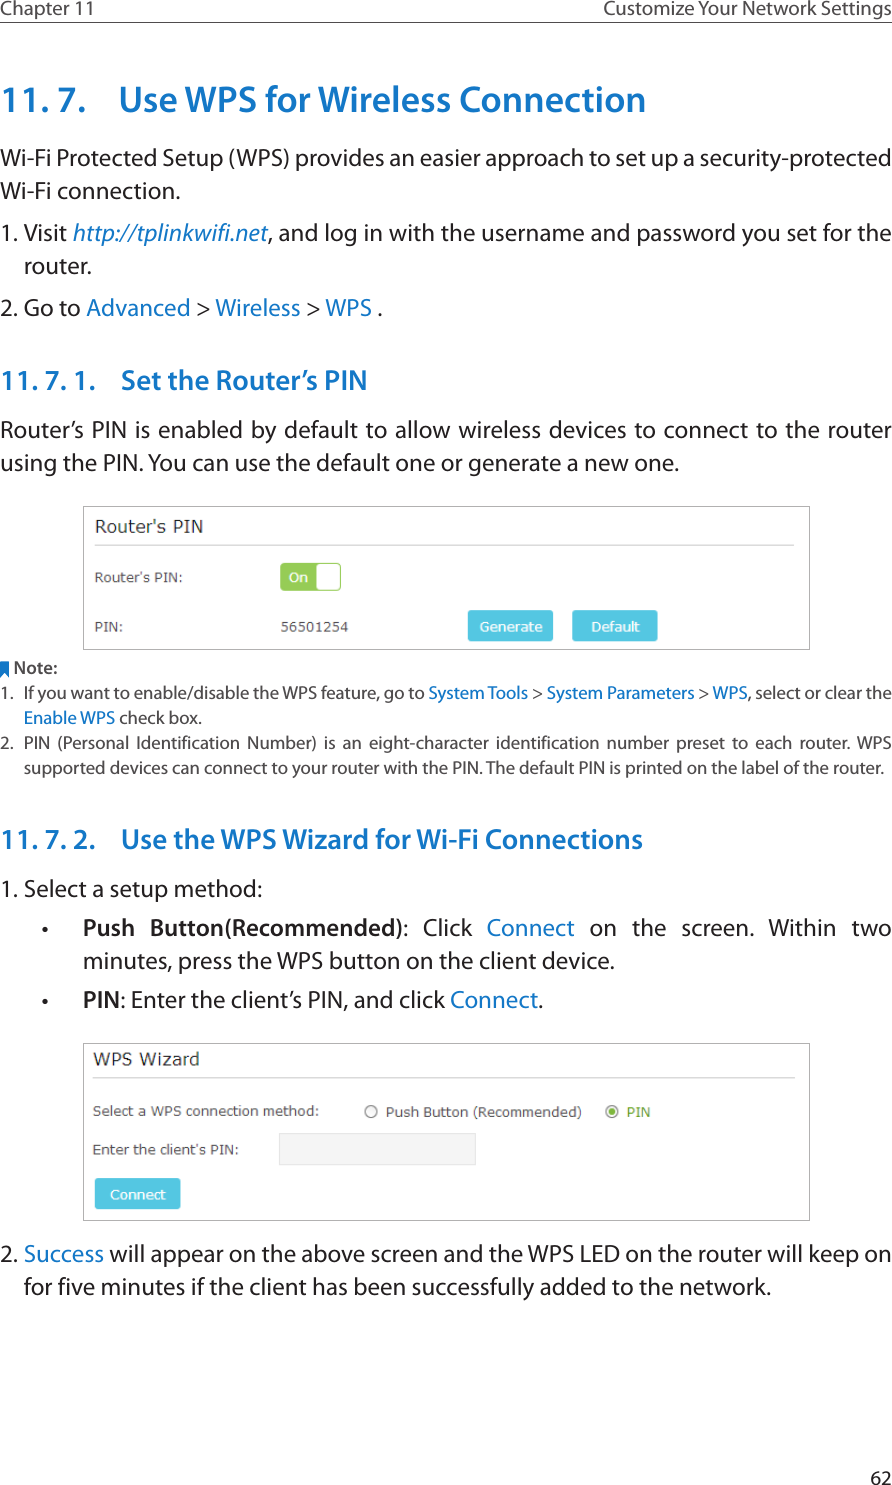 62Chapter 11 Customize Your Network Settings11. 7.  Use WPS for Wireless ConnectionWi-Fi Protected Setup (WPS) provides an easier approach to set up a security-protected Wi-Fi connection.1. Visit http://tplinkwifi.net, and log in with the username and password you set for the router.2. Go to Advanced &gt; Wireless &gt; WPS .11. 7. 1.  Set the Router’s PINRouter’s PIN is enabled by default to allow wireless devices to connect to the router using the PIN. You can use the default one or generate a new one.Note:1.  If you want to enable/disable the WPS feature, go to System Tools &gt; System Parameters &gt; WPS, select or clear the Enable WPS check box.2.  PIN (Personal Identification Number) is an eight-character identification number preset to each router. WPS supported devices can connect to your router with the PIN. The default PIN is printed on the label of the router.11. 7. 2.  Use the WPS Wizard for Wi-Fi Connections1. Select a setup method: •  Push Button(Recommended): Click Connect on the screen. Within two minutes, press the WPS button on the client device.•  PIN: Enter the client’s PIN, and click Connect.2. Success will appear on the above screen and the WPS LED on the router will keep on for five minutes if the client has been successfully added to the network.